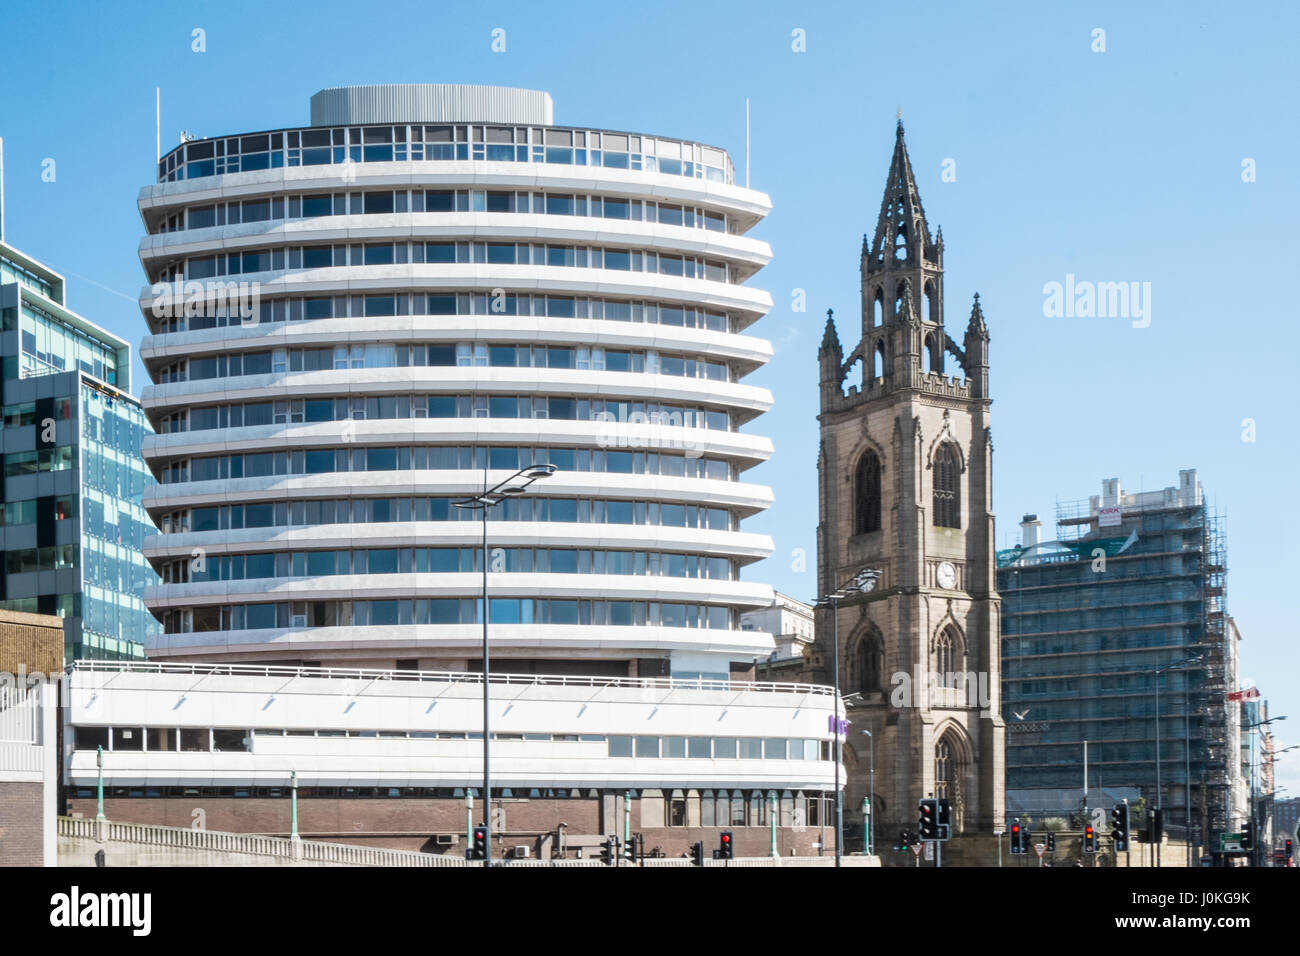 St Nicholas Church,known as, St Nick's, and is the sailors,seaman's, church, Liverpool,Merseyside,England,City,Northern,North,England,English,UK. Stock Photo